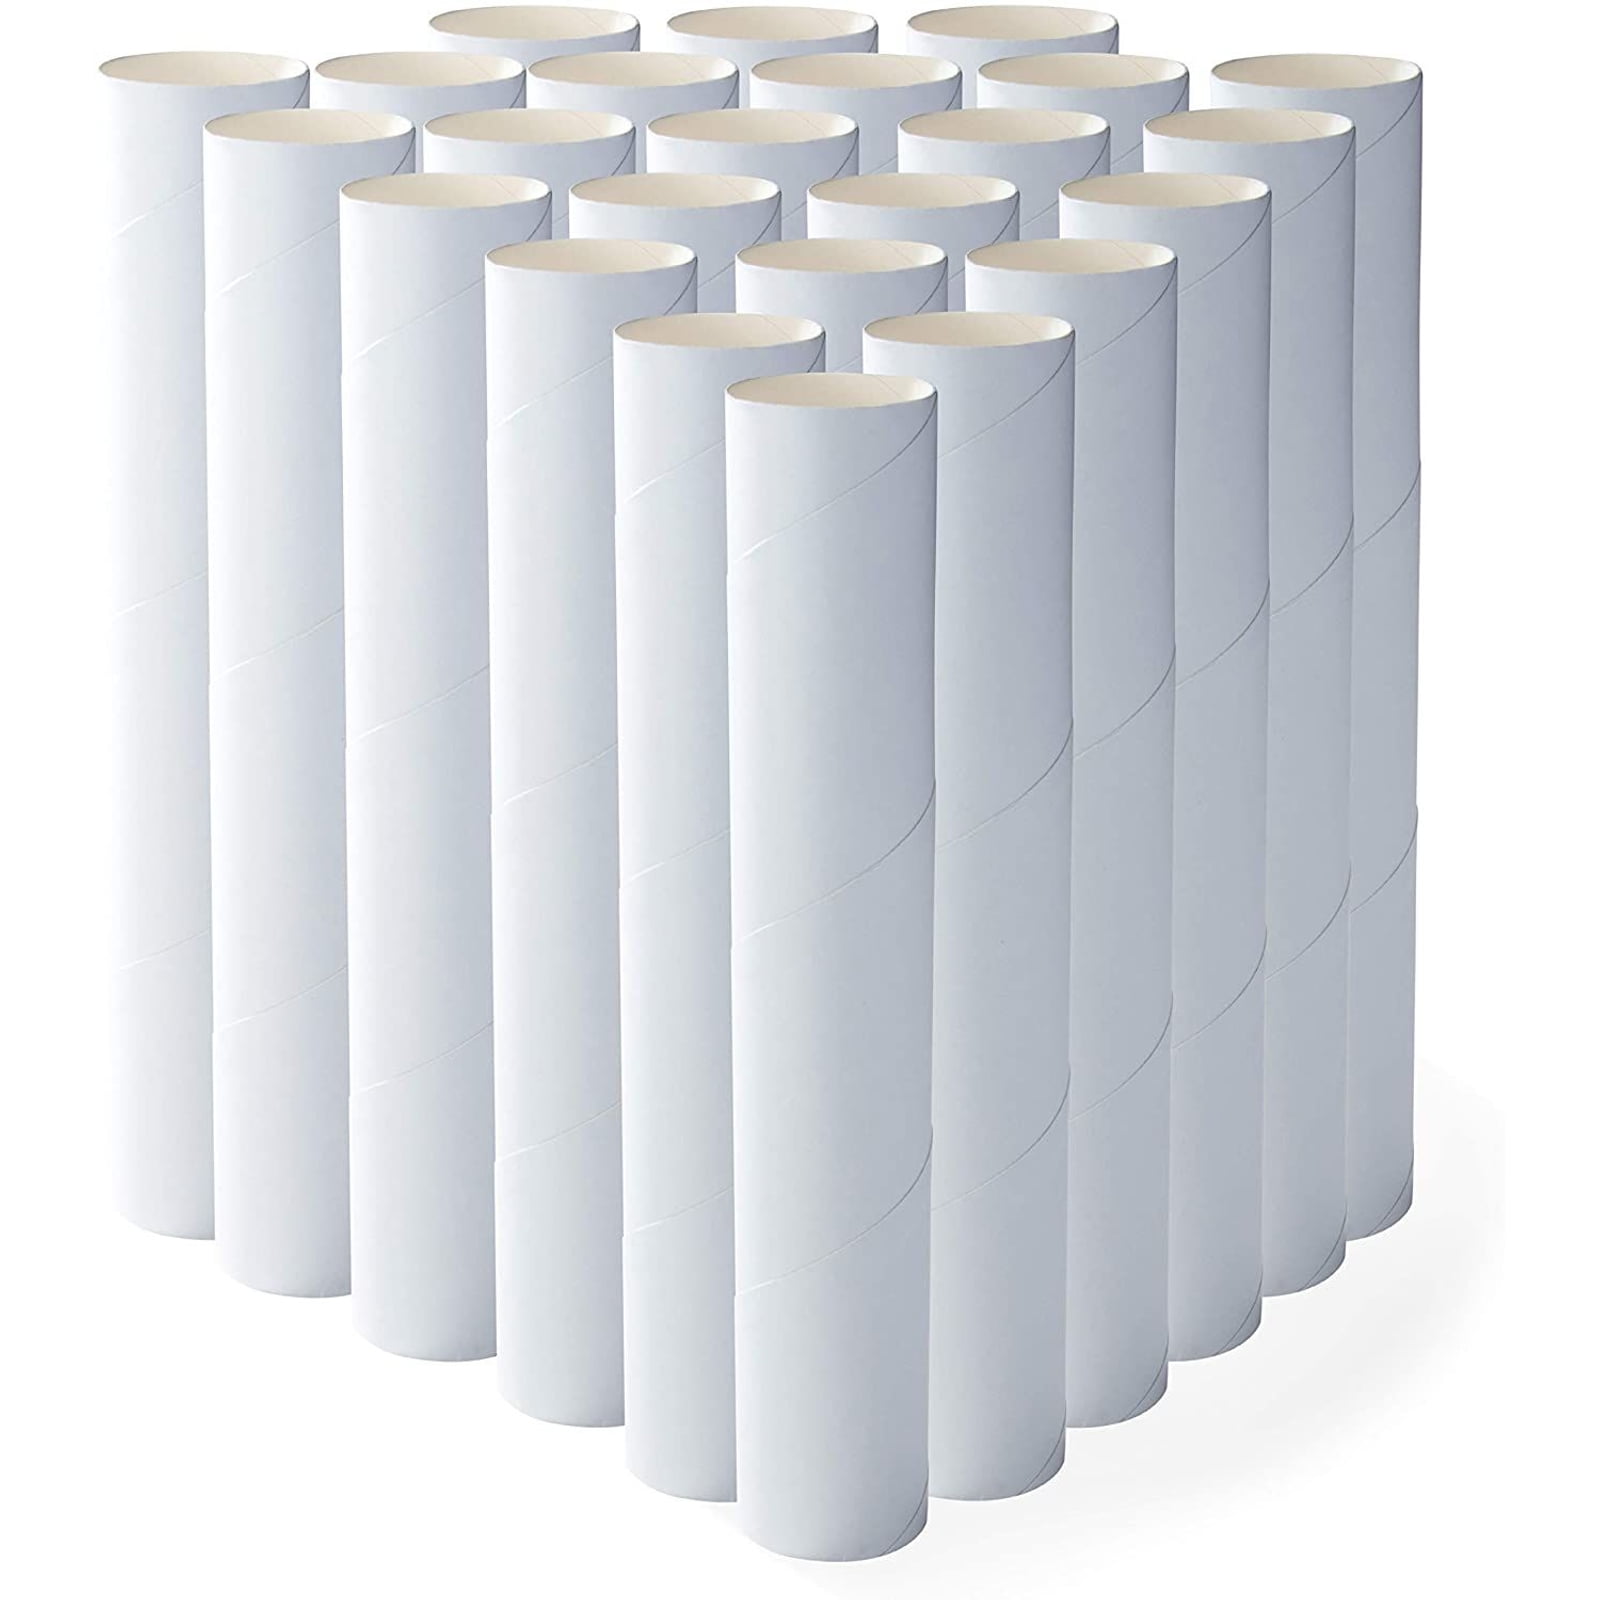 24 Pack Toilet Paper Rolls For Crafts, Empty White Cardboard Tubes for  Classroom, DIY Projects (1.6 x 4 In)